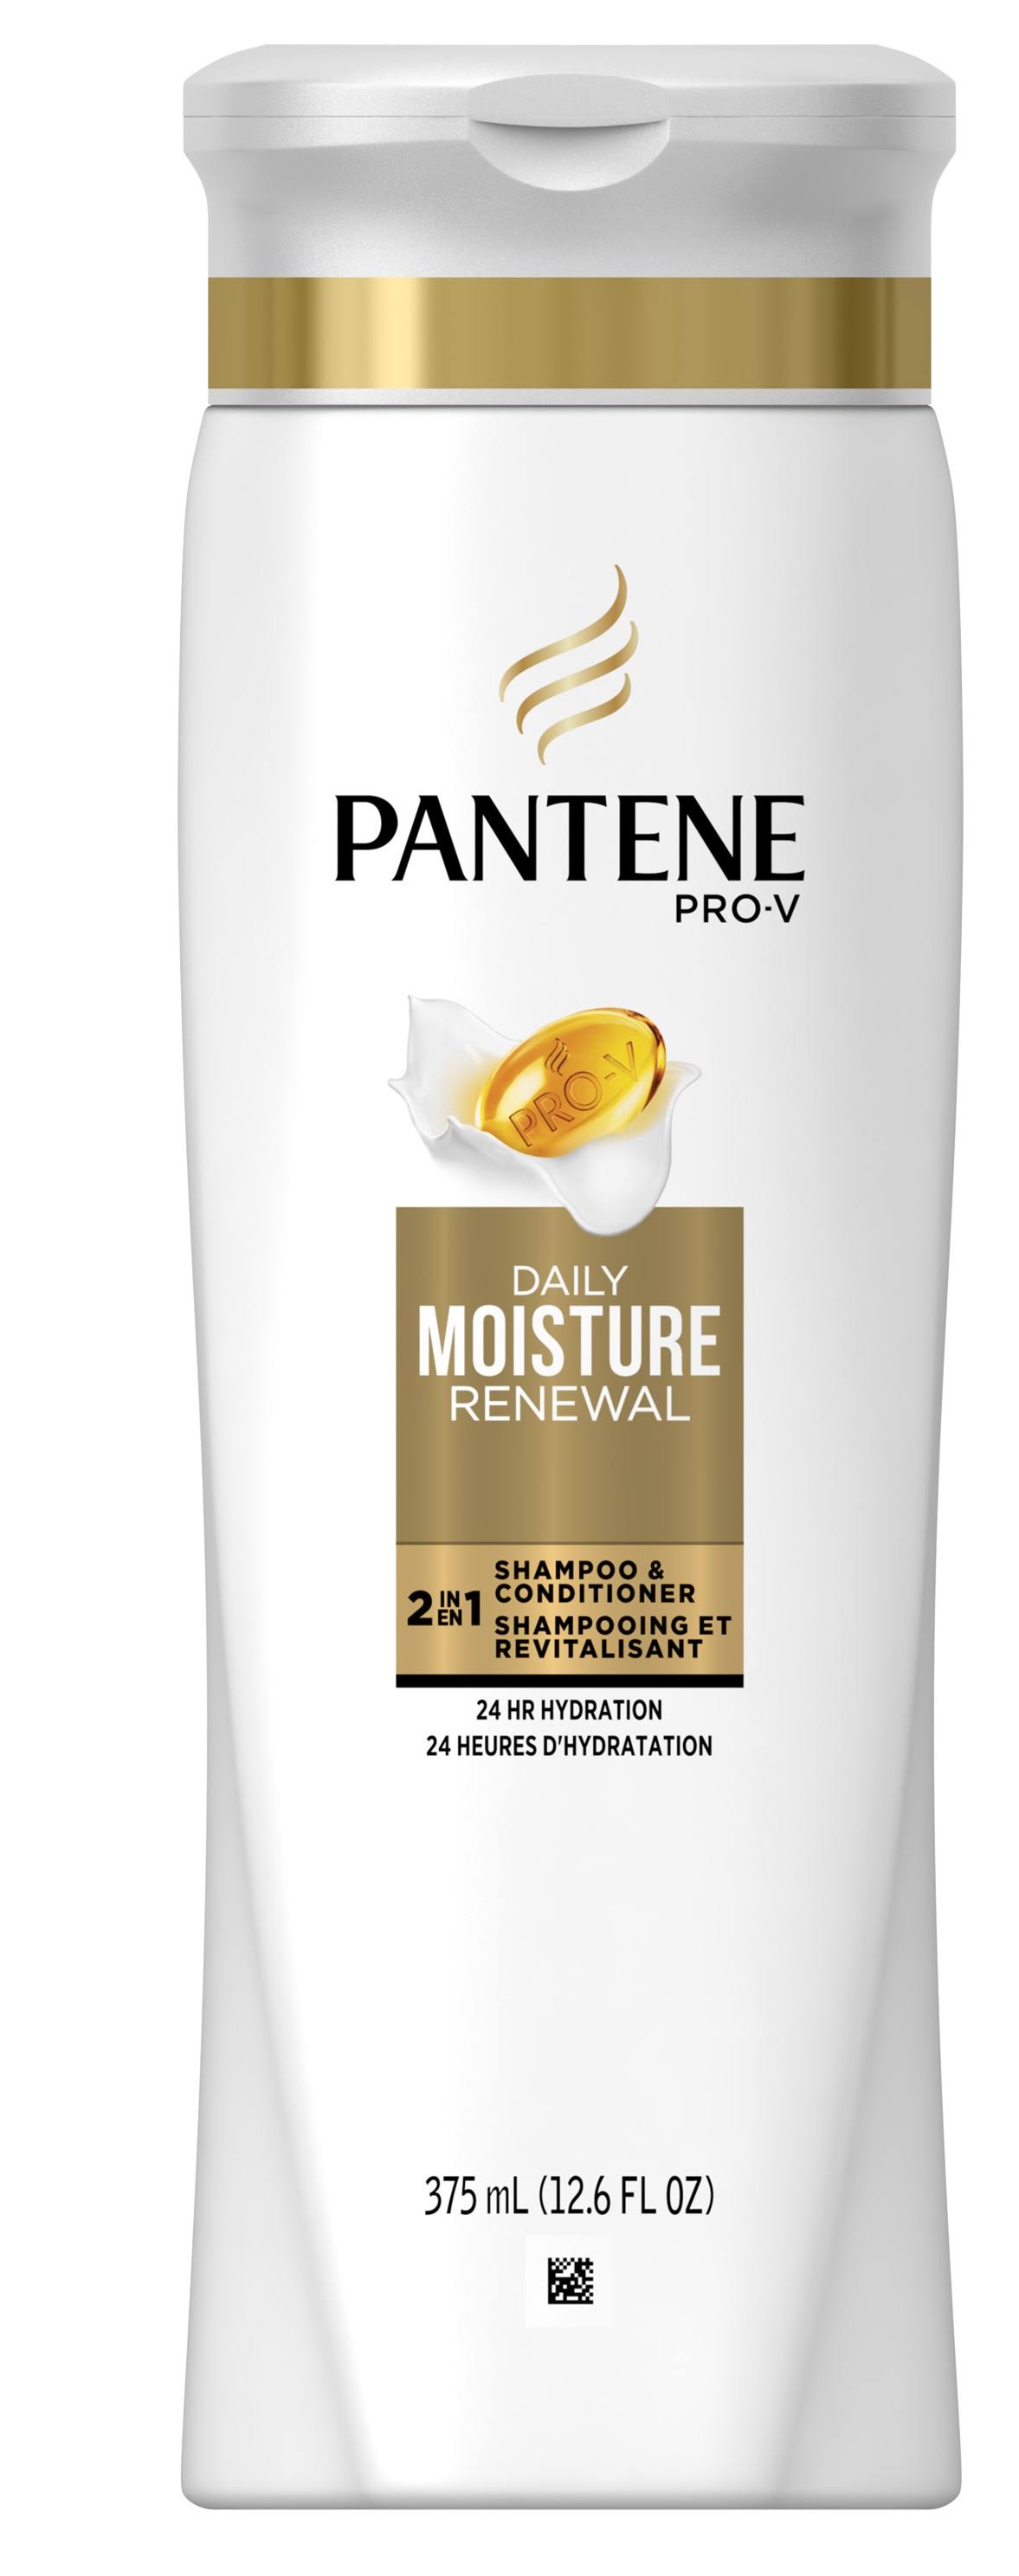 Pantene 2 in 1 Daily Moisture Renewal Shampoo and Conditioner - 375ml